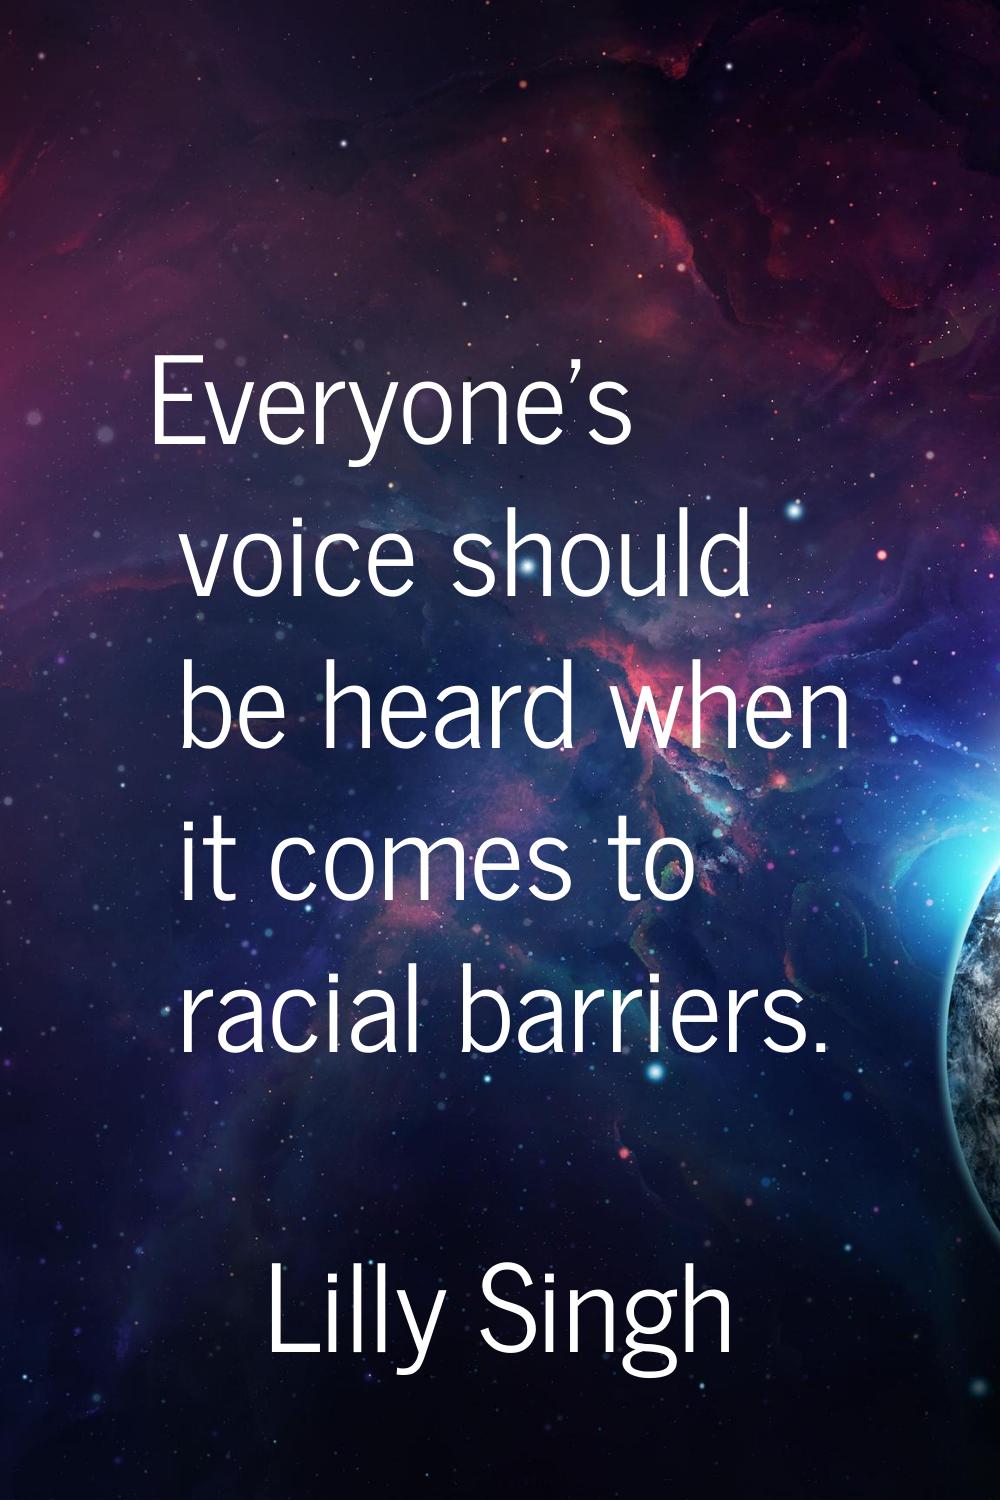 Everyone's voice should be heard when it comes to racial barriers.